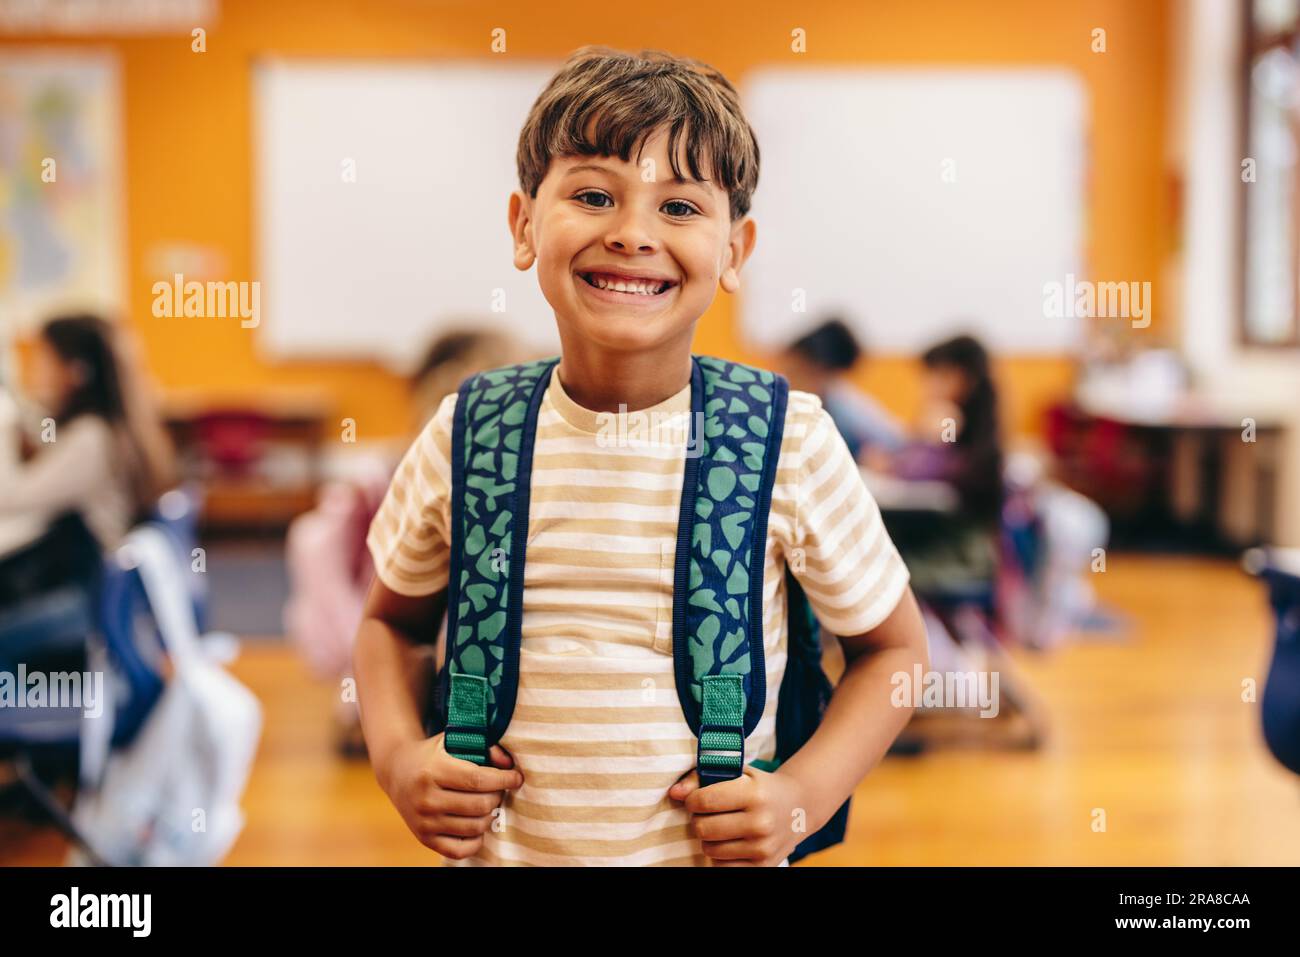 Lifestyle of learning: Elementary school child excited for first day of class. Little boy smiling at the camera as he stands in an elementary school c Stock Photo